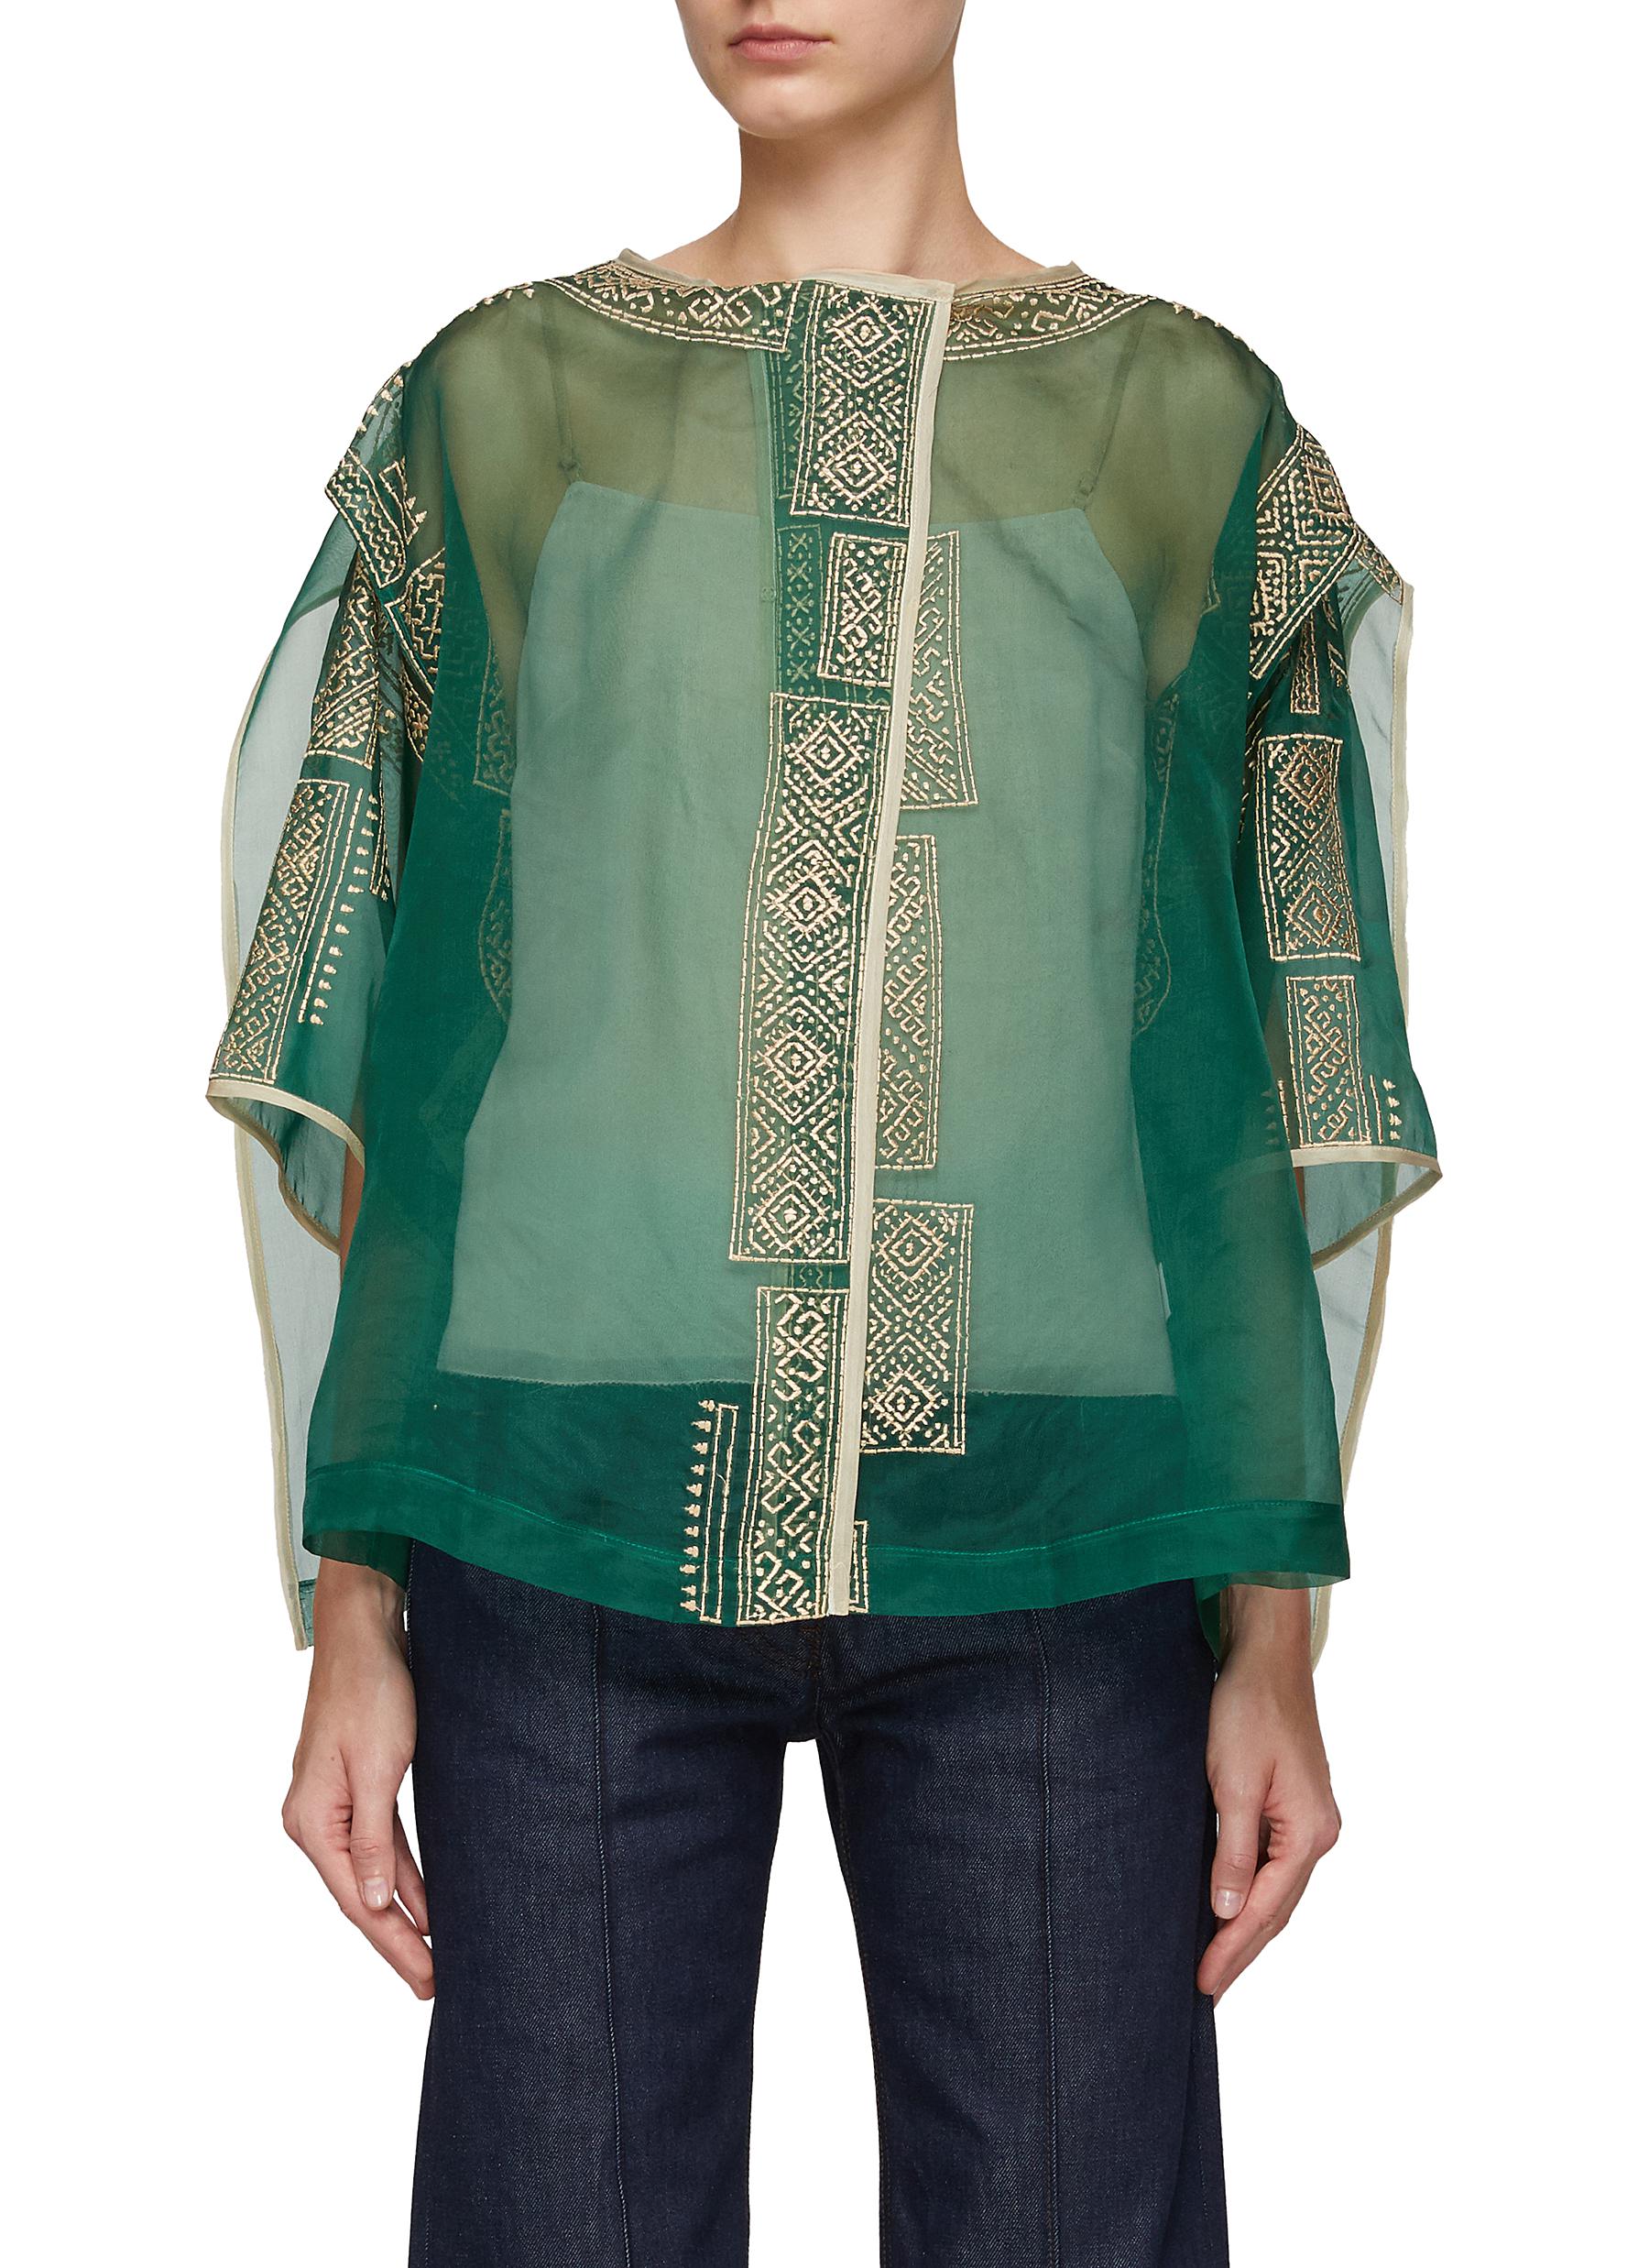 BIYAN Embroidered Sheer Cape Blouse